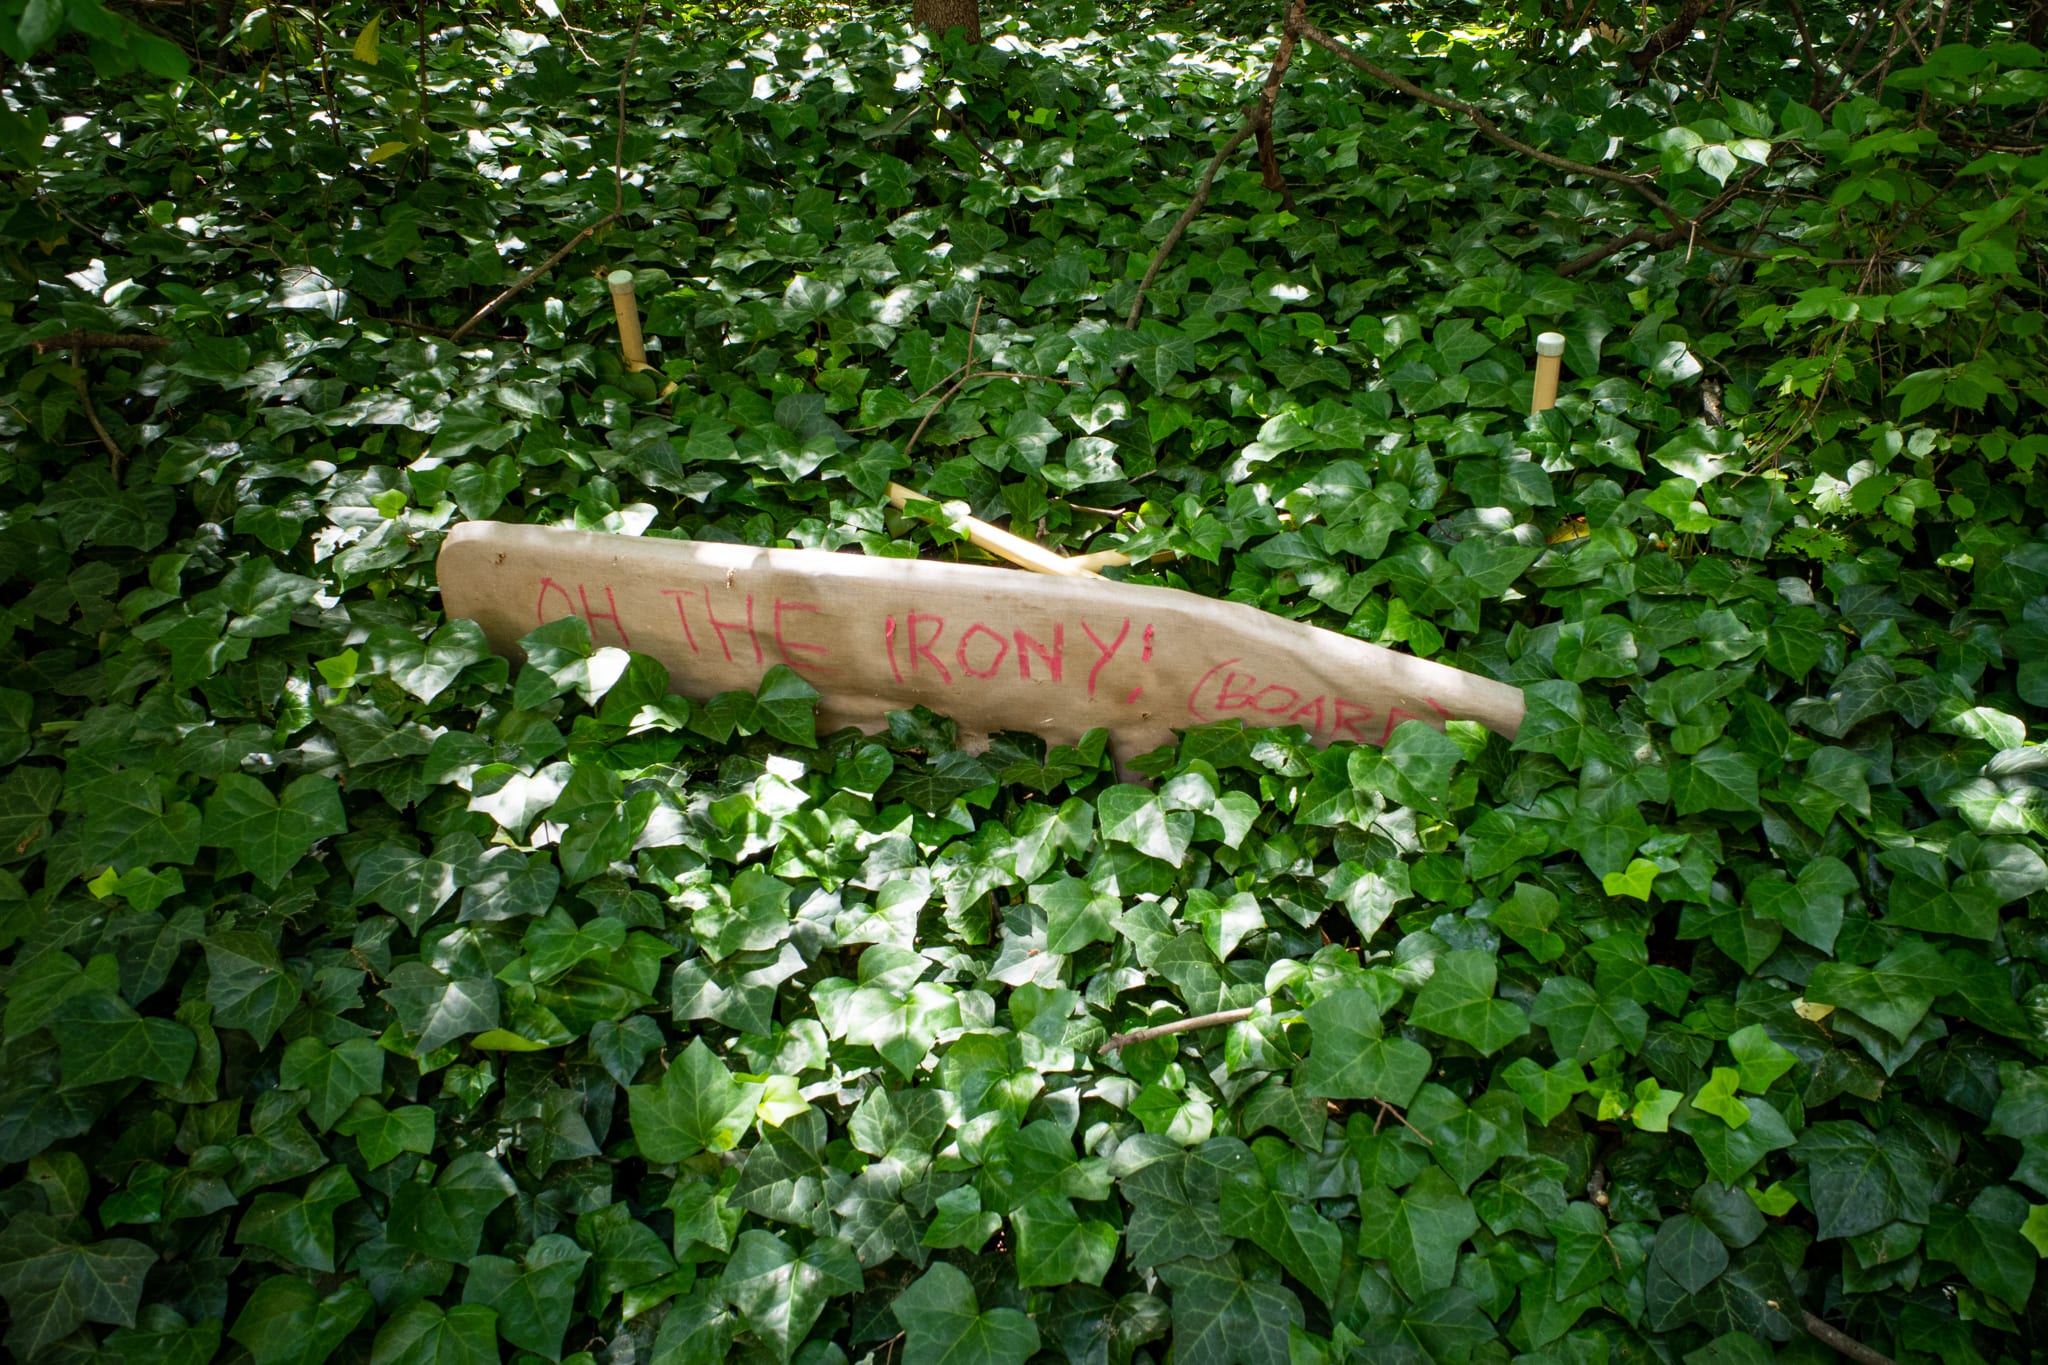 ironing board nestled in ivy with 'oh the irony (board)' written on it